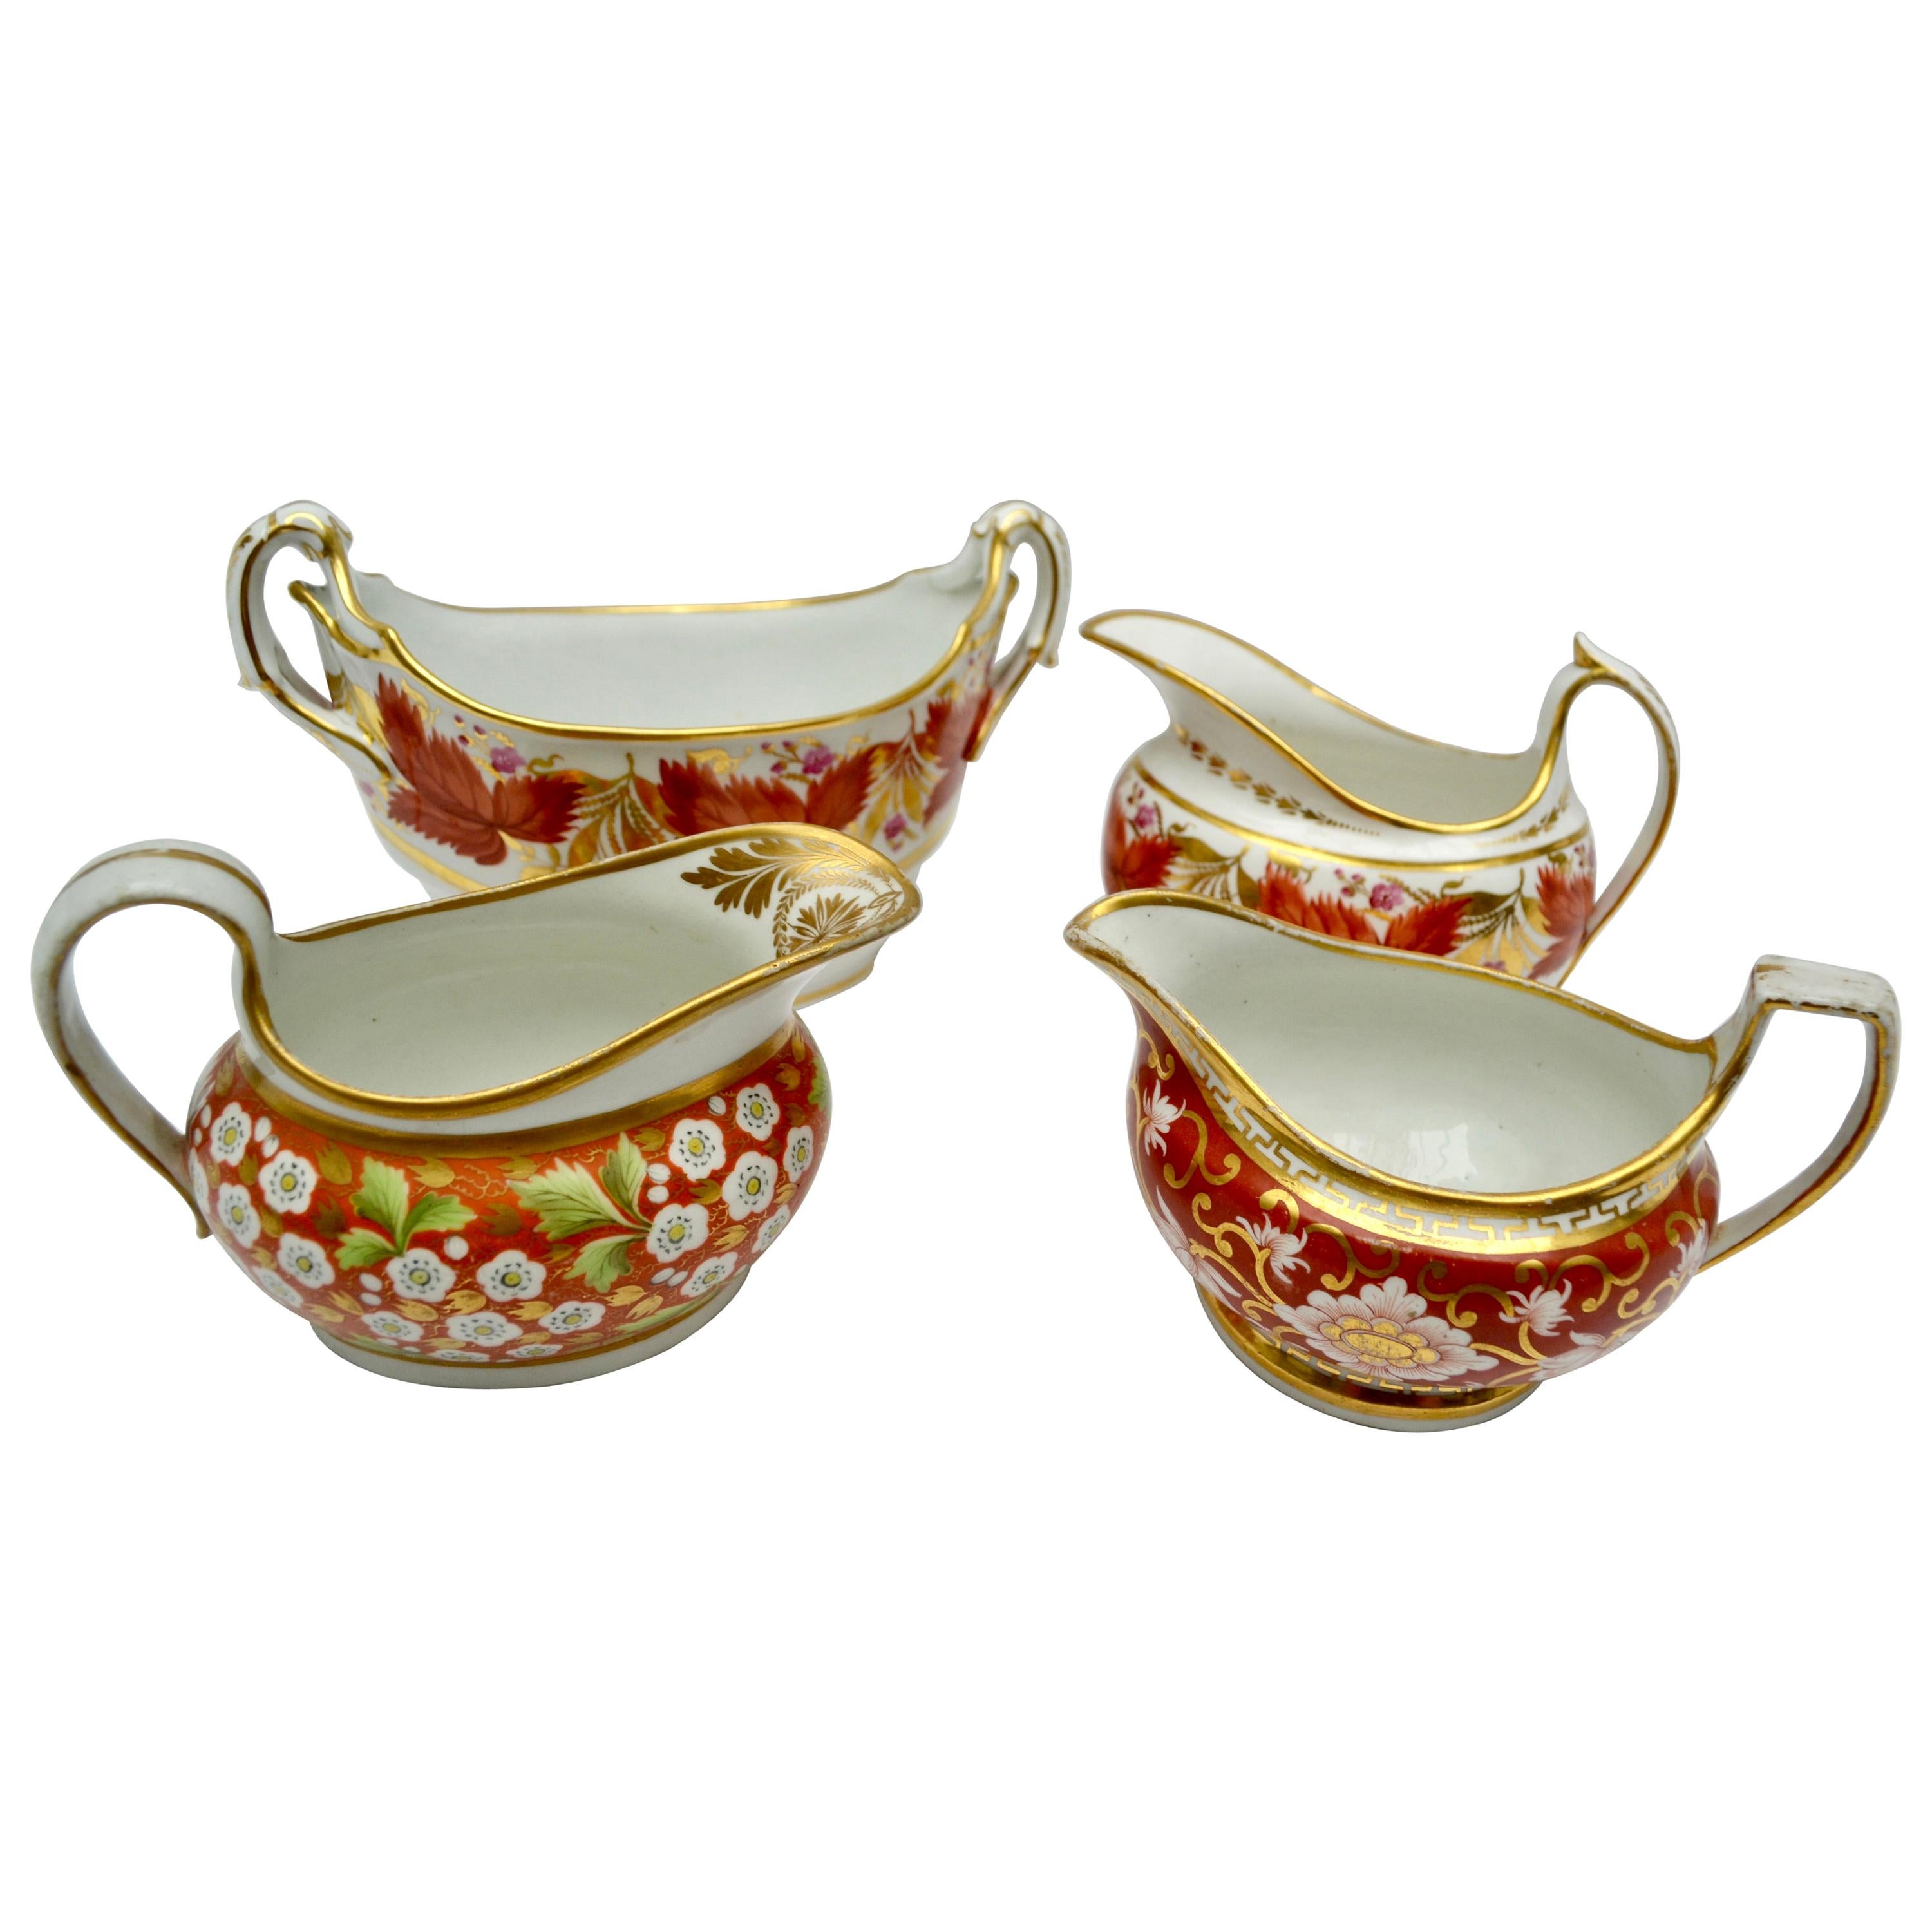 Four Early 19th Century English Porcelain Gravy or Sauce Boats